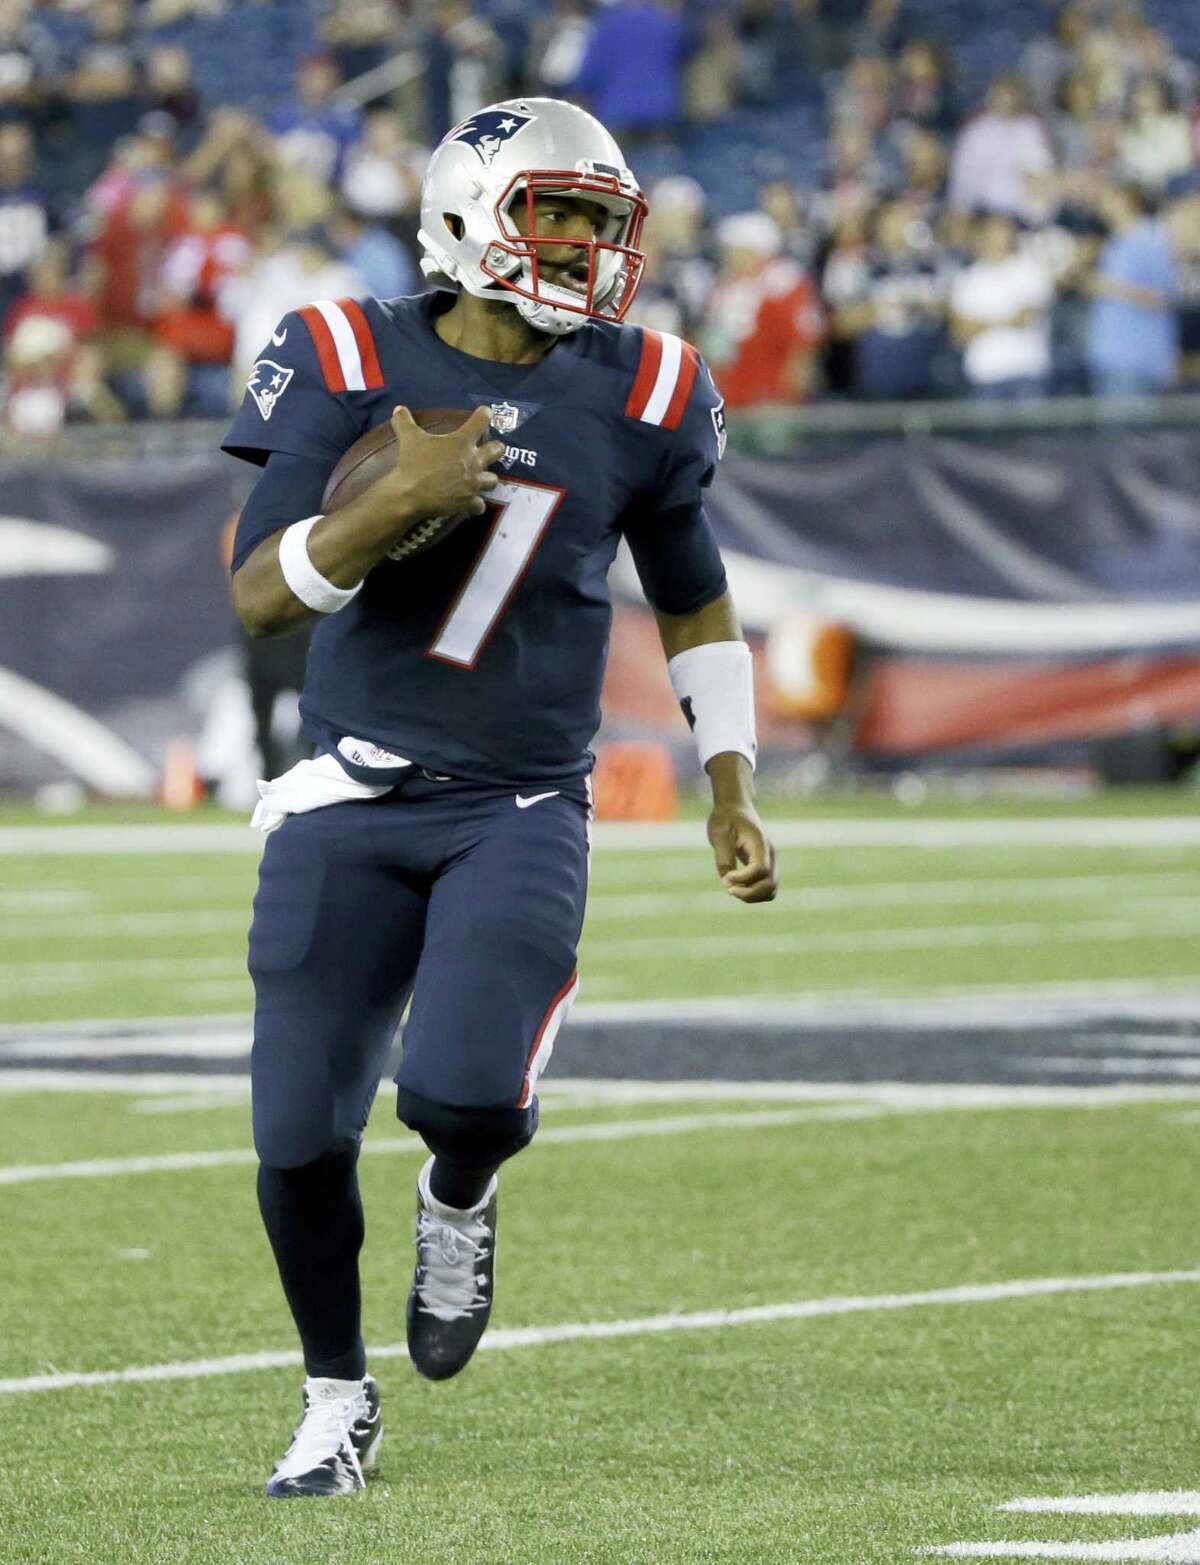 Patriots quarterback Jacoby Brissett injured his thumb in Thursday’s win over the Texans.